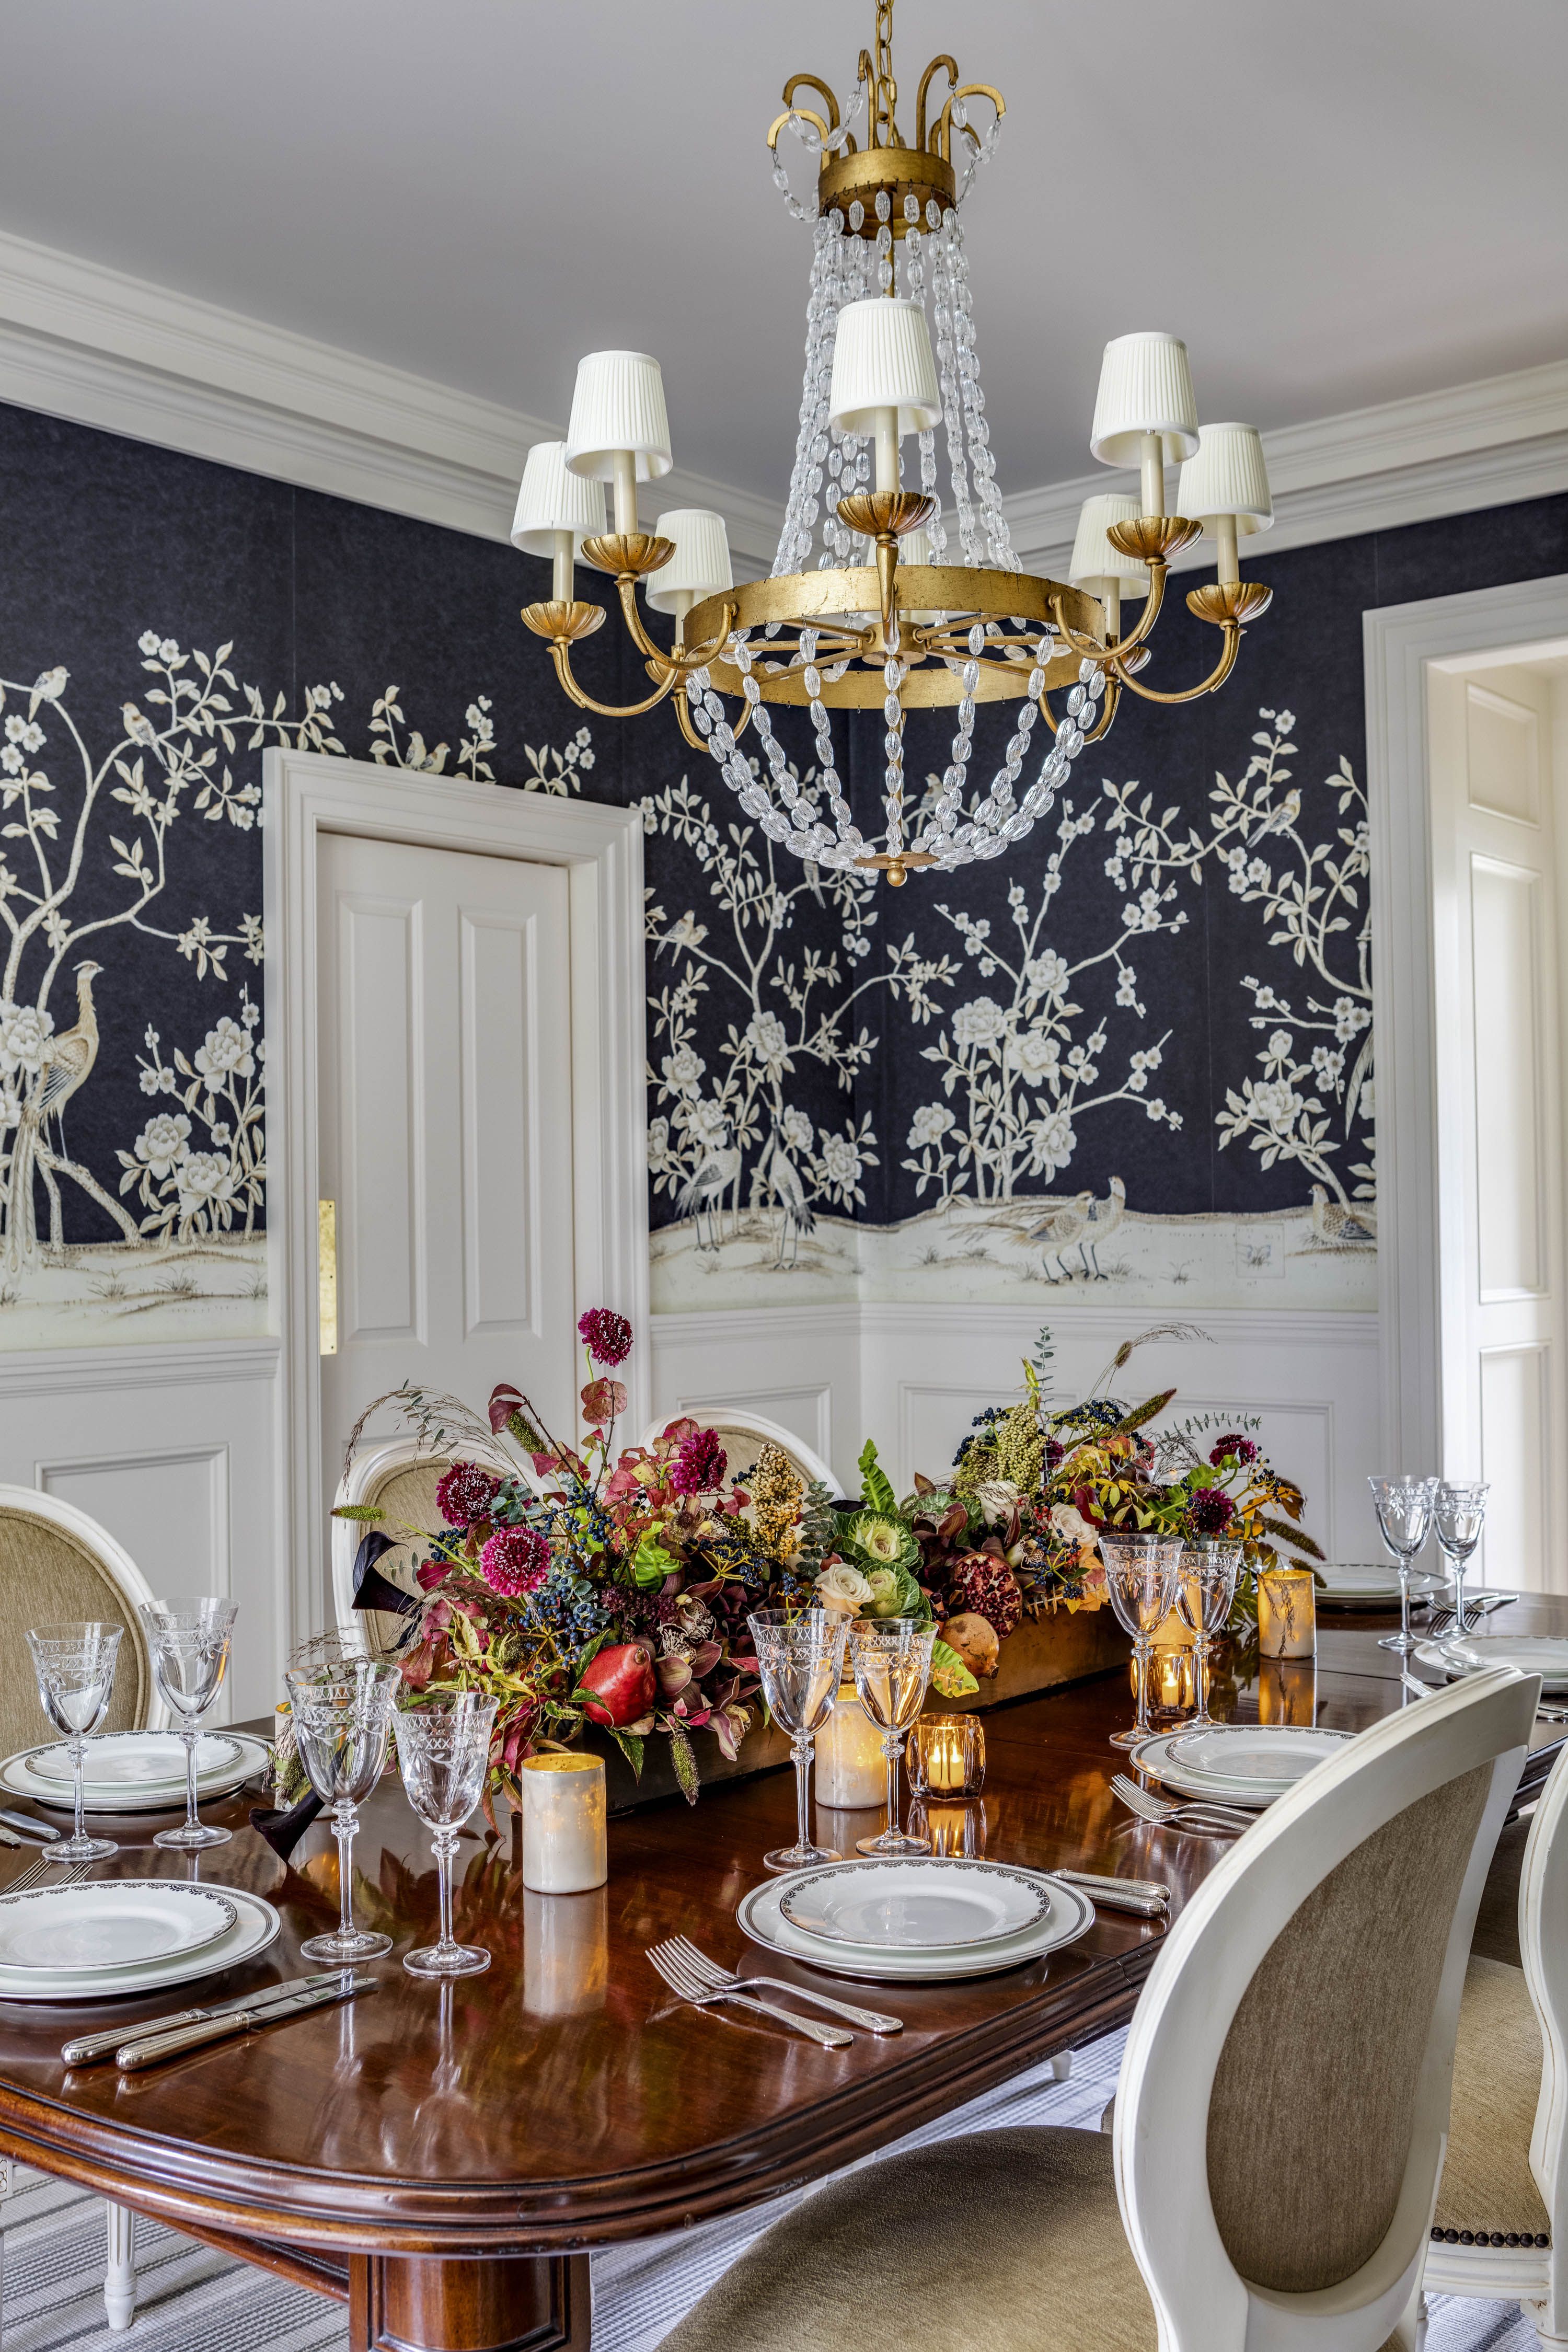 23 Dining Room Wallpaper Ideas You Need to Consider